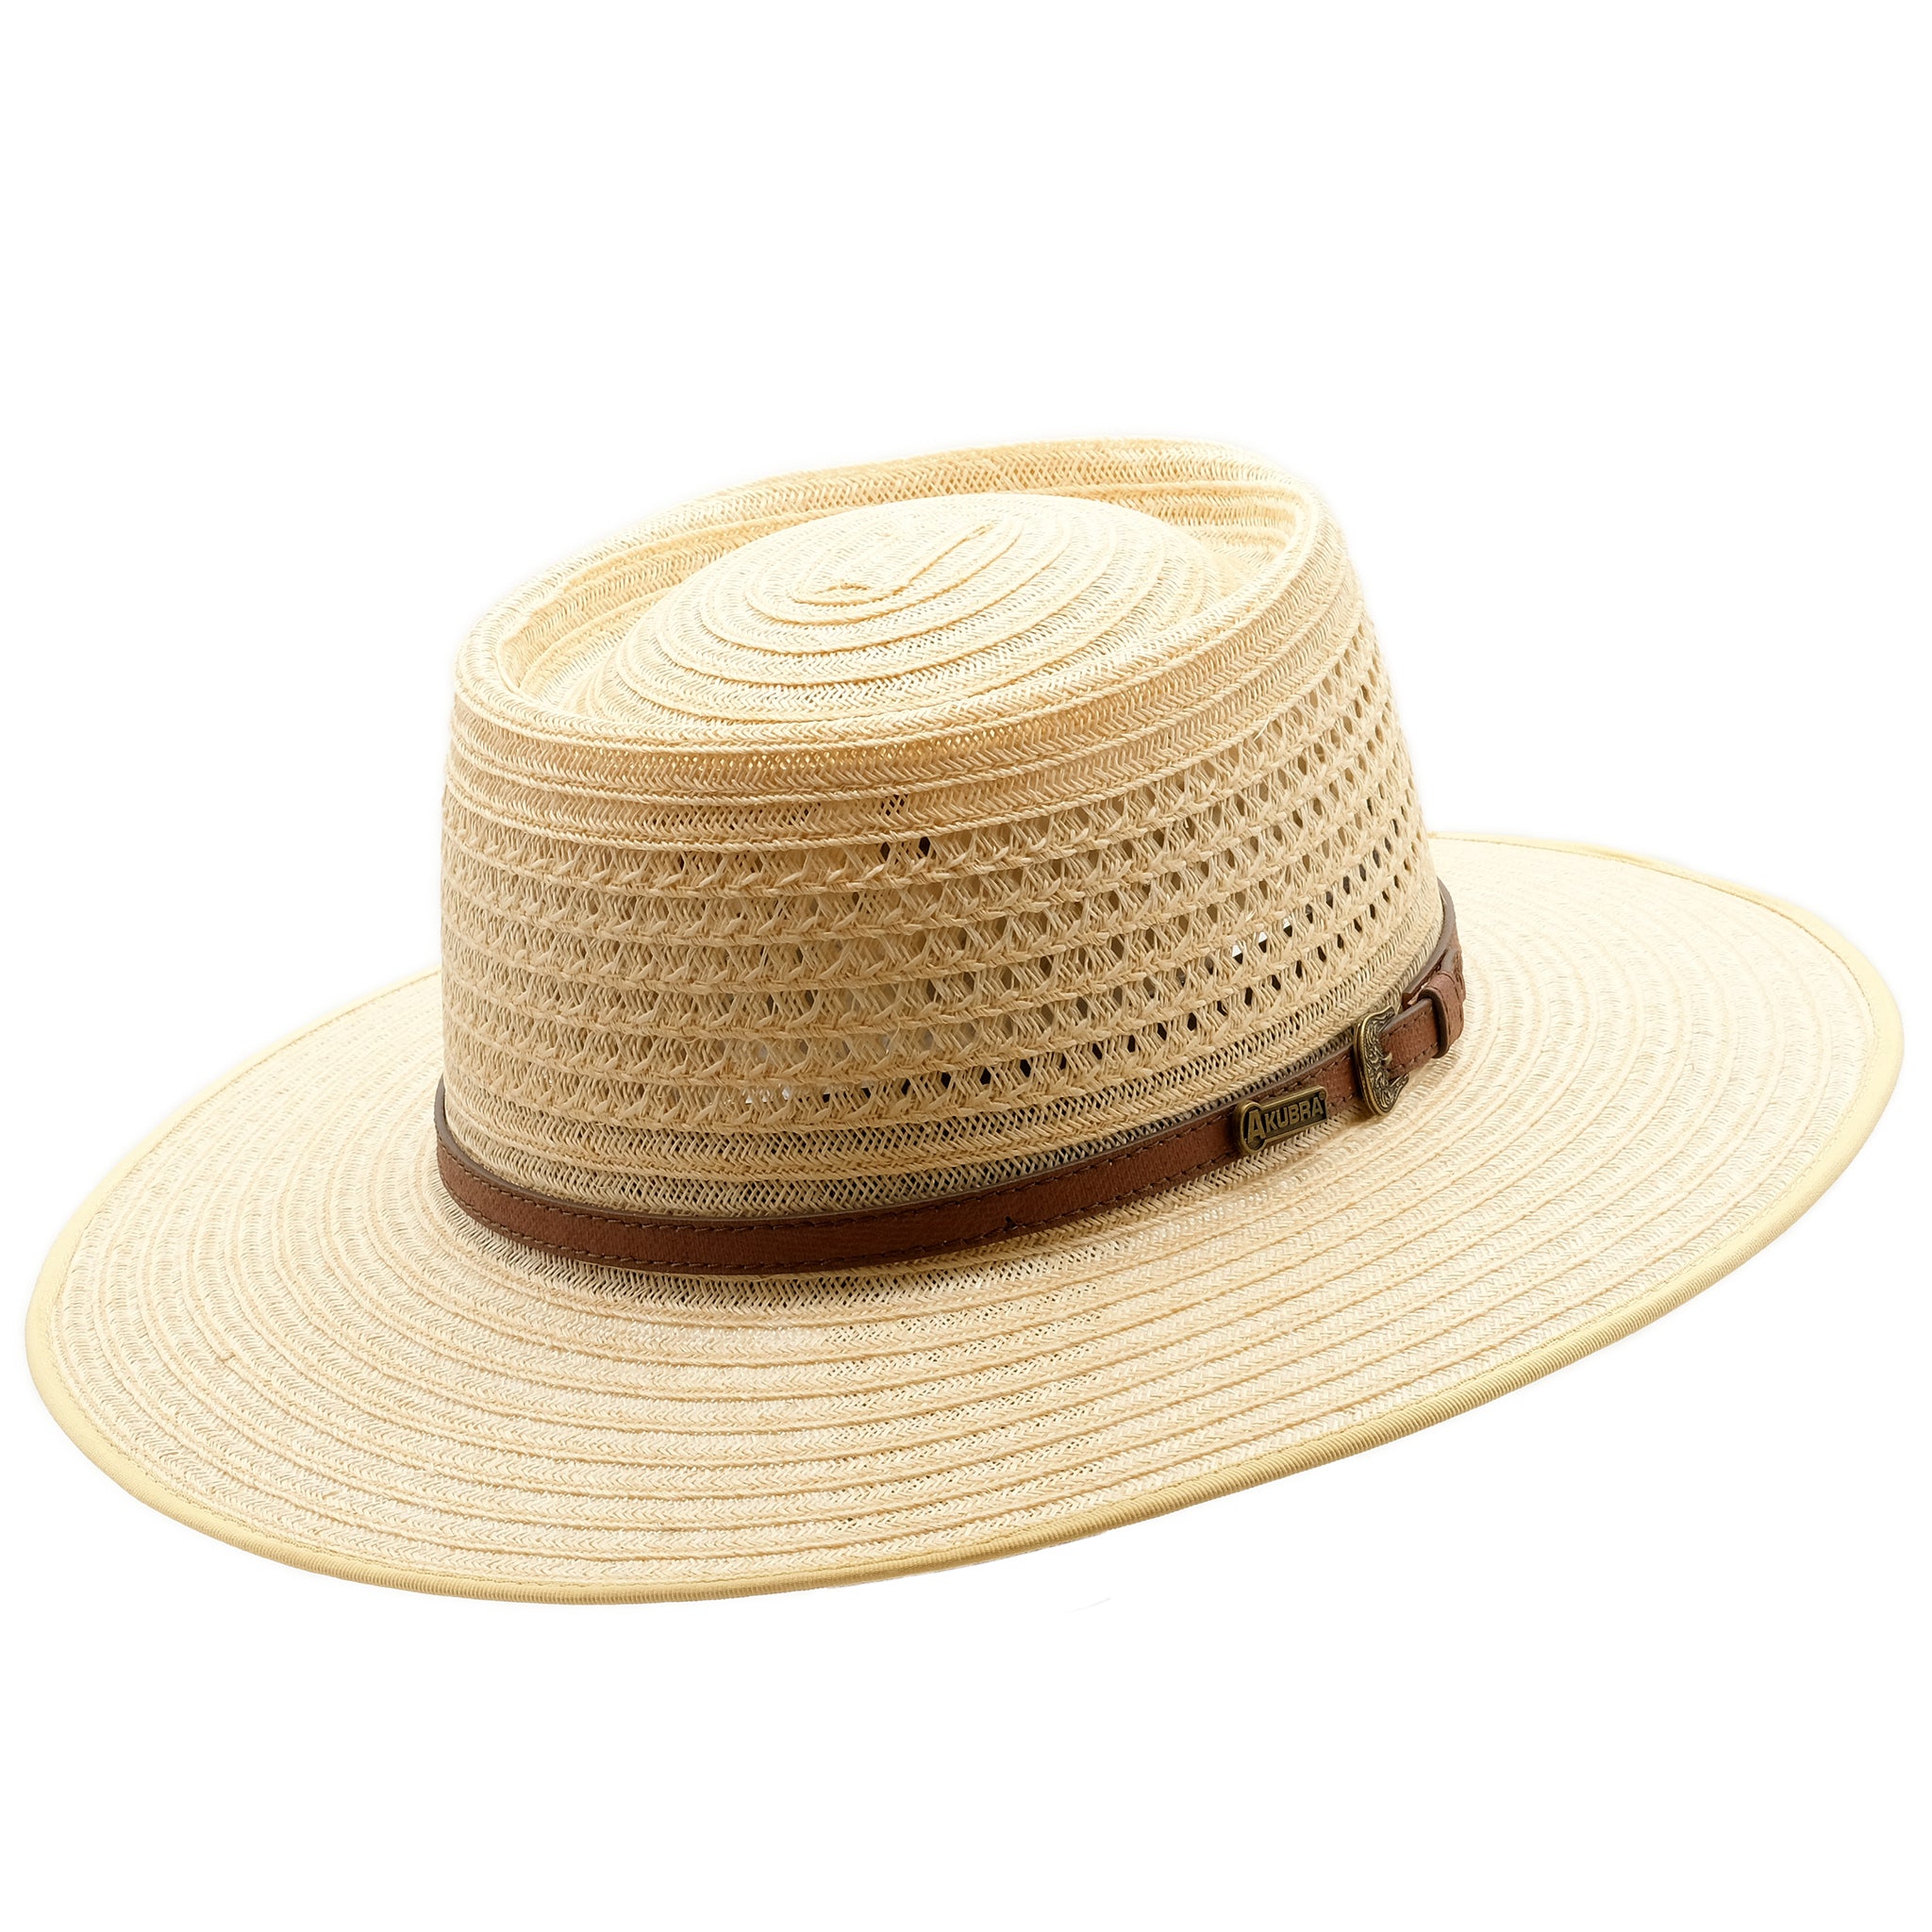 Angle view of Akubra Byron in Natural Straw colour